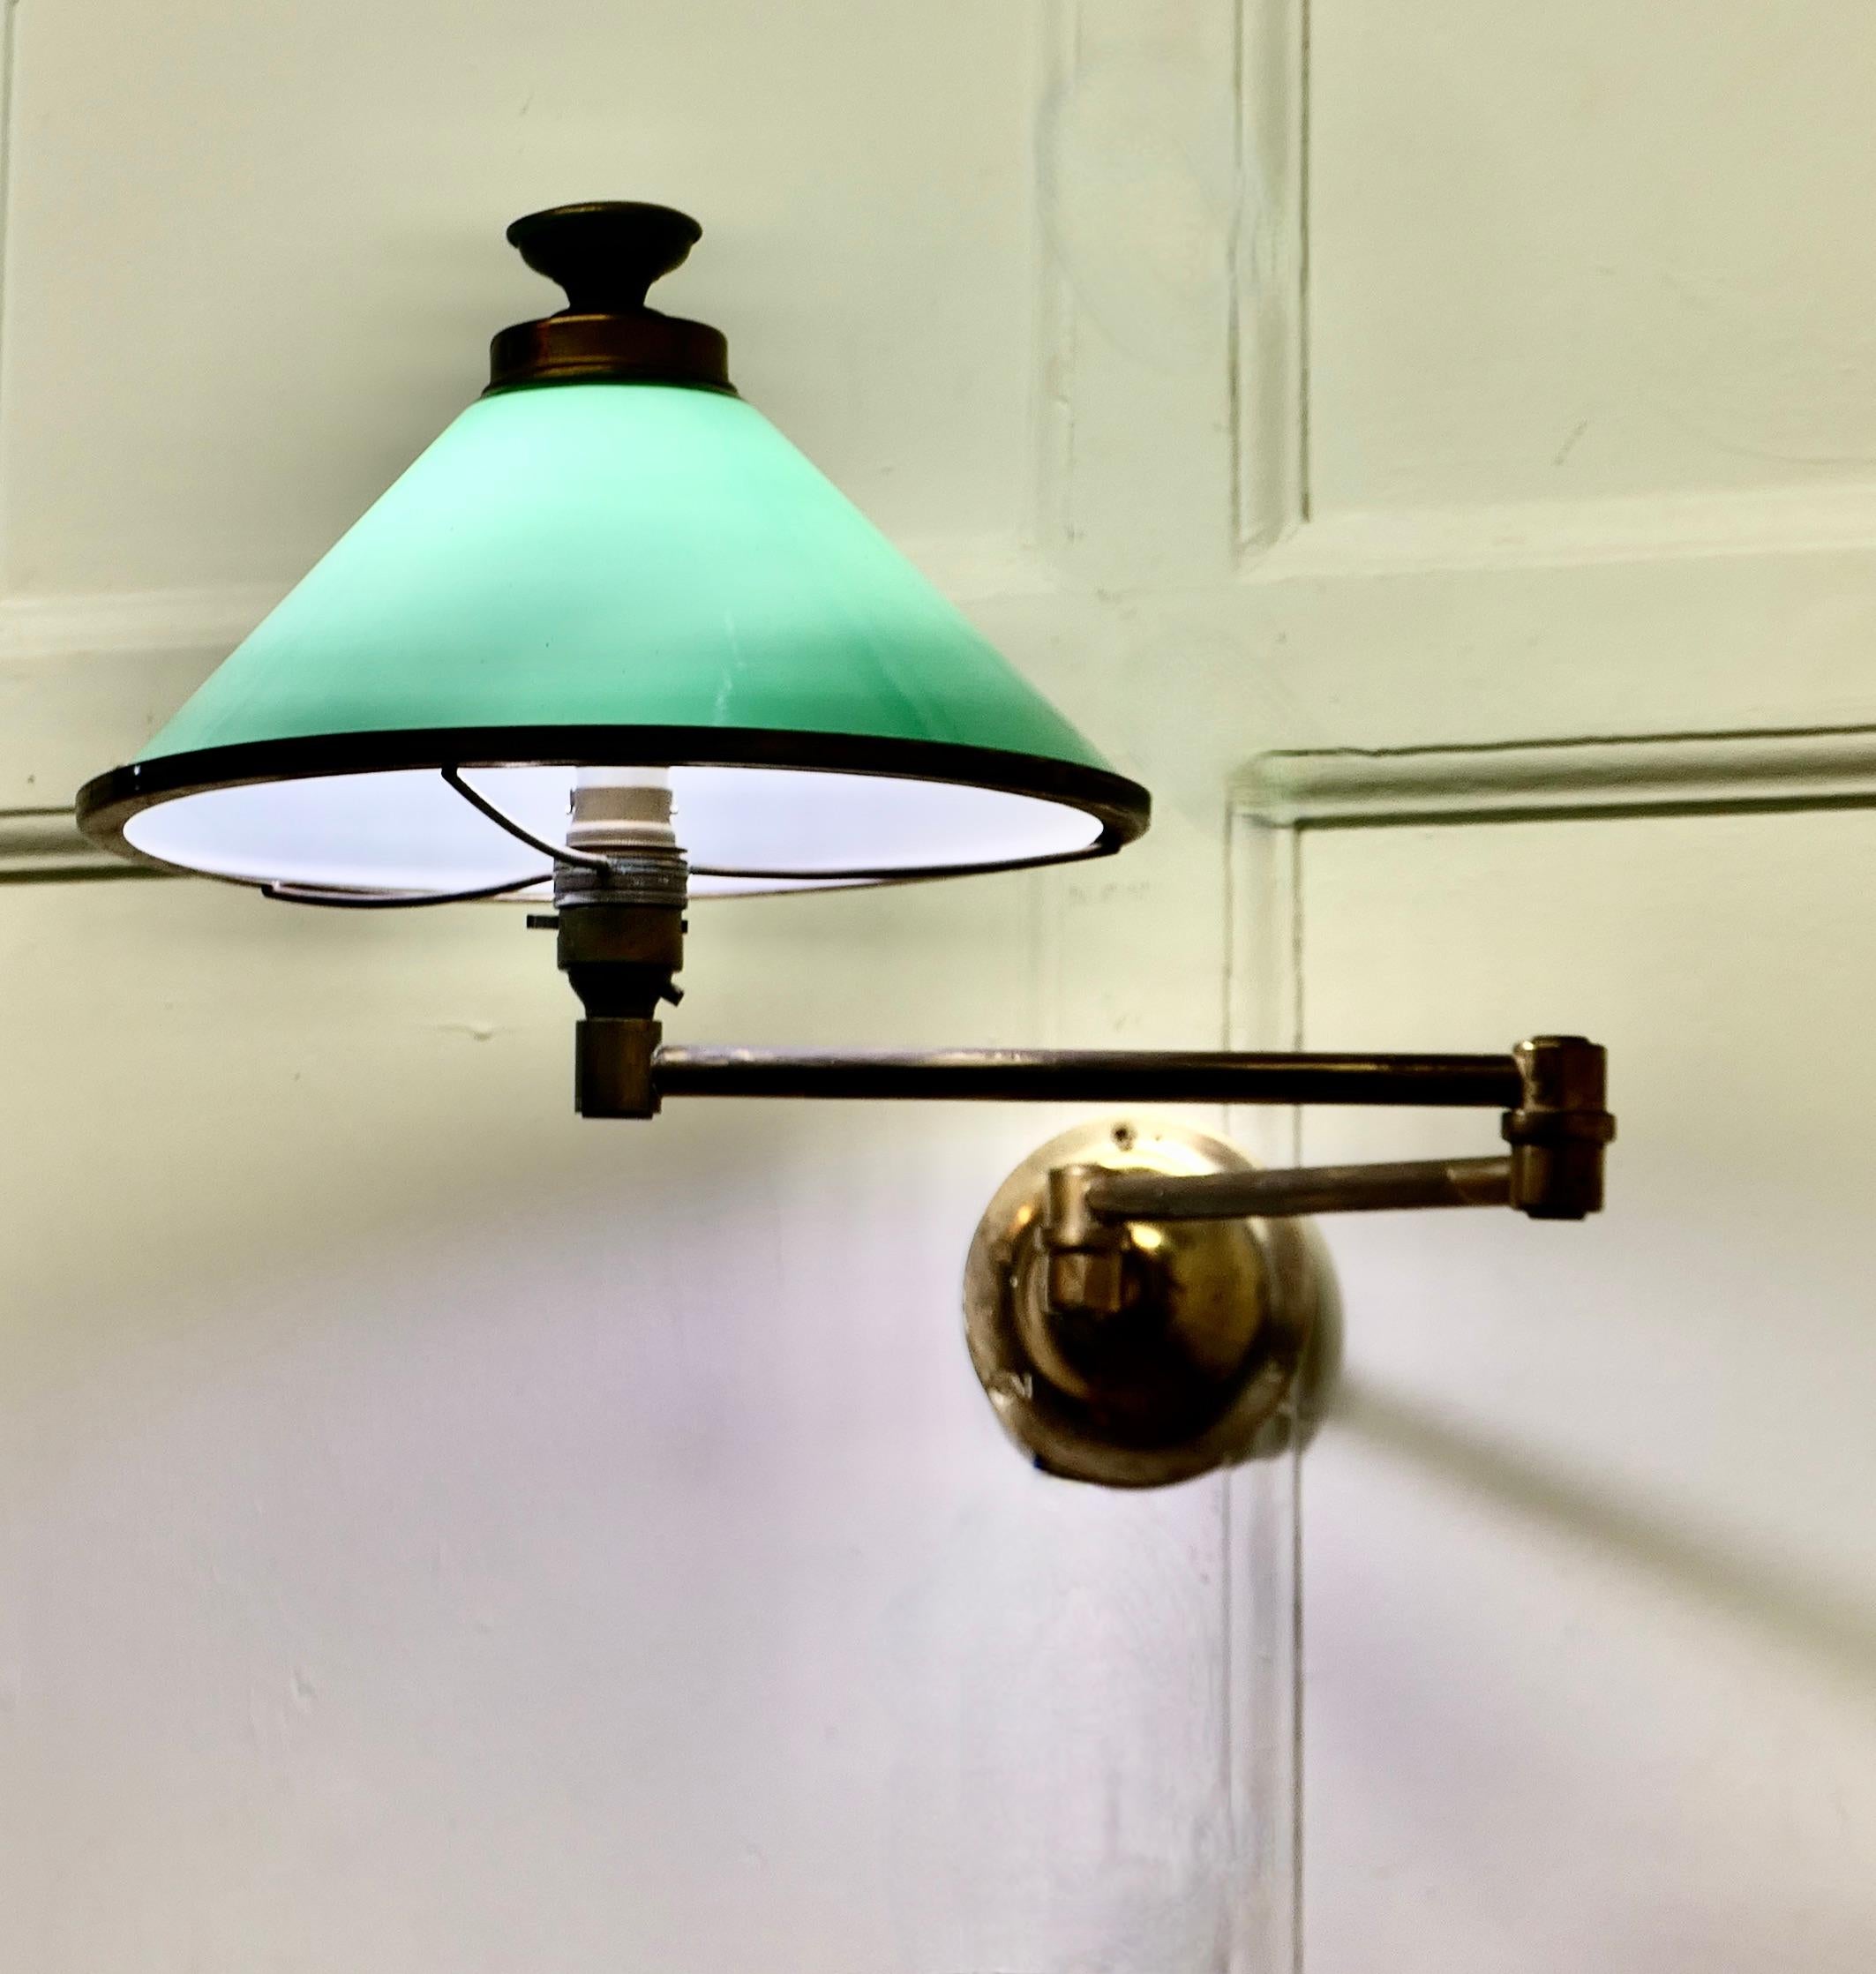 Brass and Green Glass Extending Wall Lamp
 
A lovely piece, the brass lamp comes with its original green glass shade
The lamp is fixed to the wall by a brass elbow bracket, allowing the lamp to be extended from side to side and back to front 
A